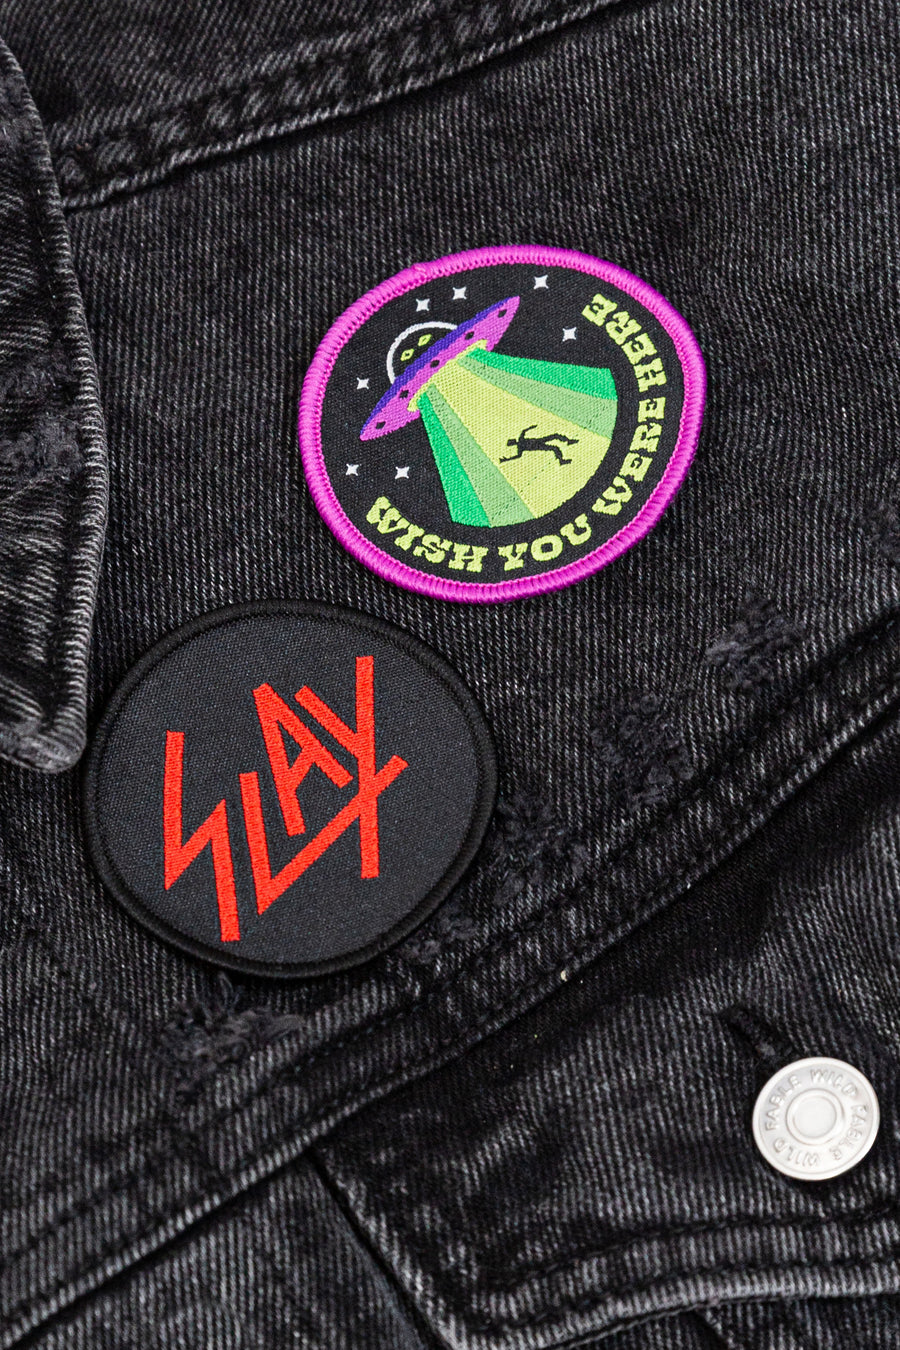 Slay Sew On Patch